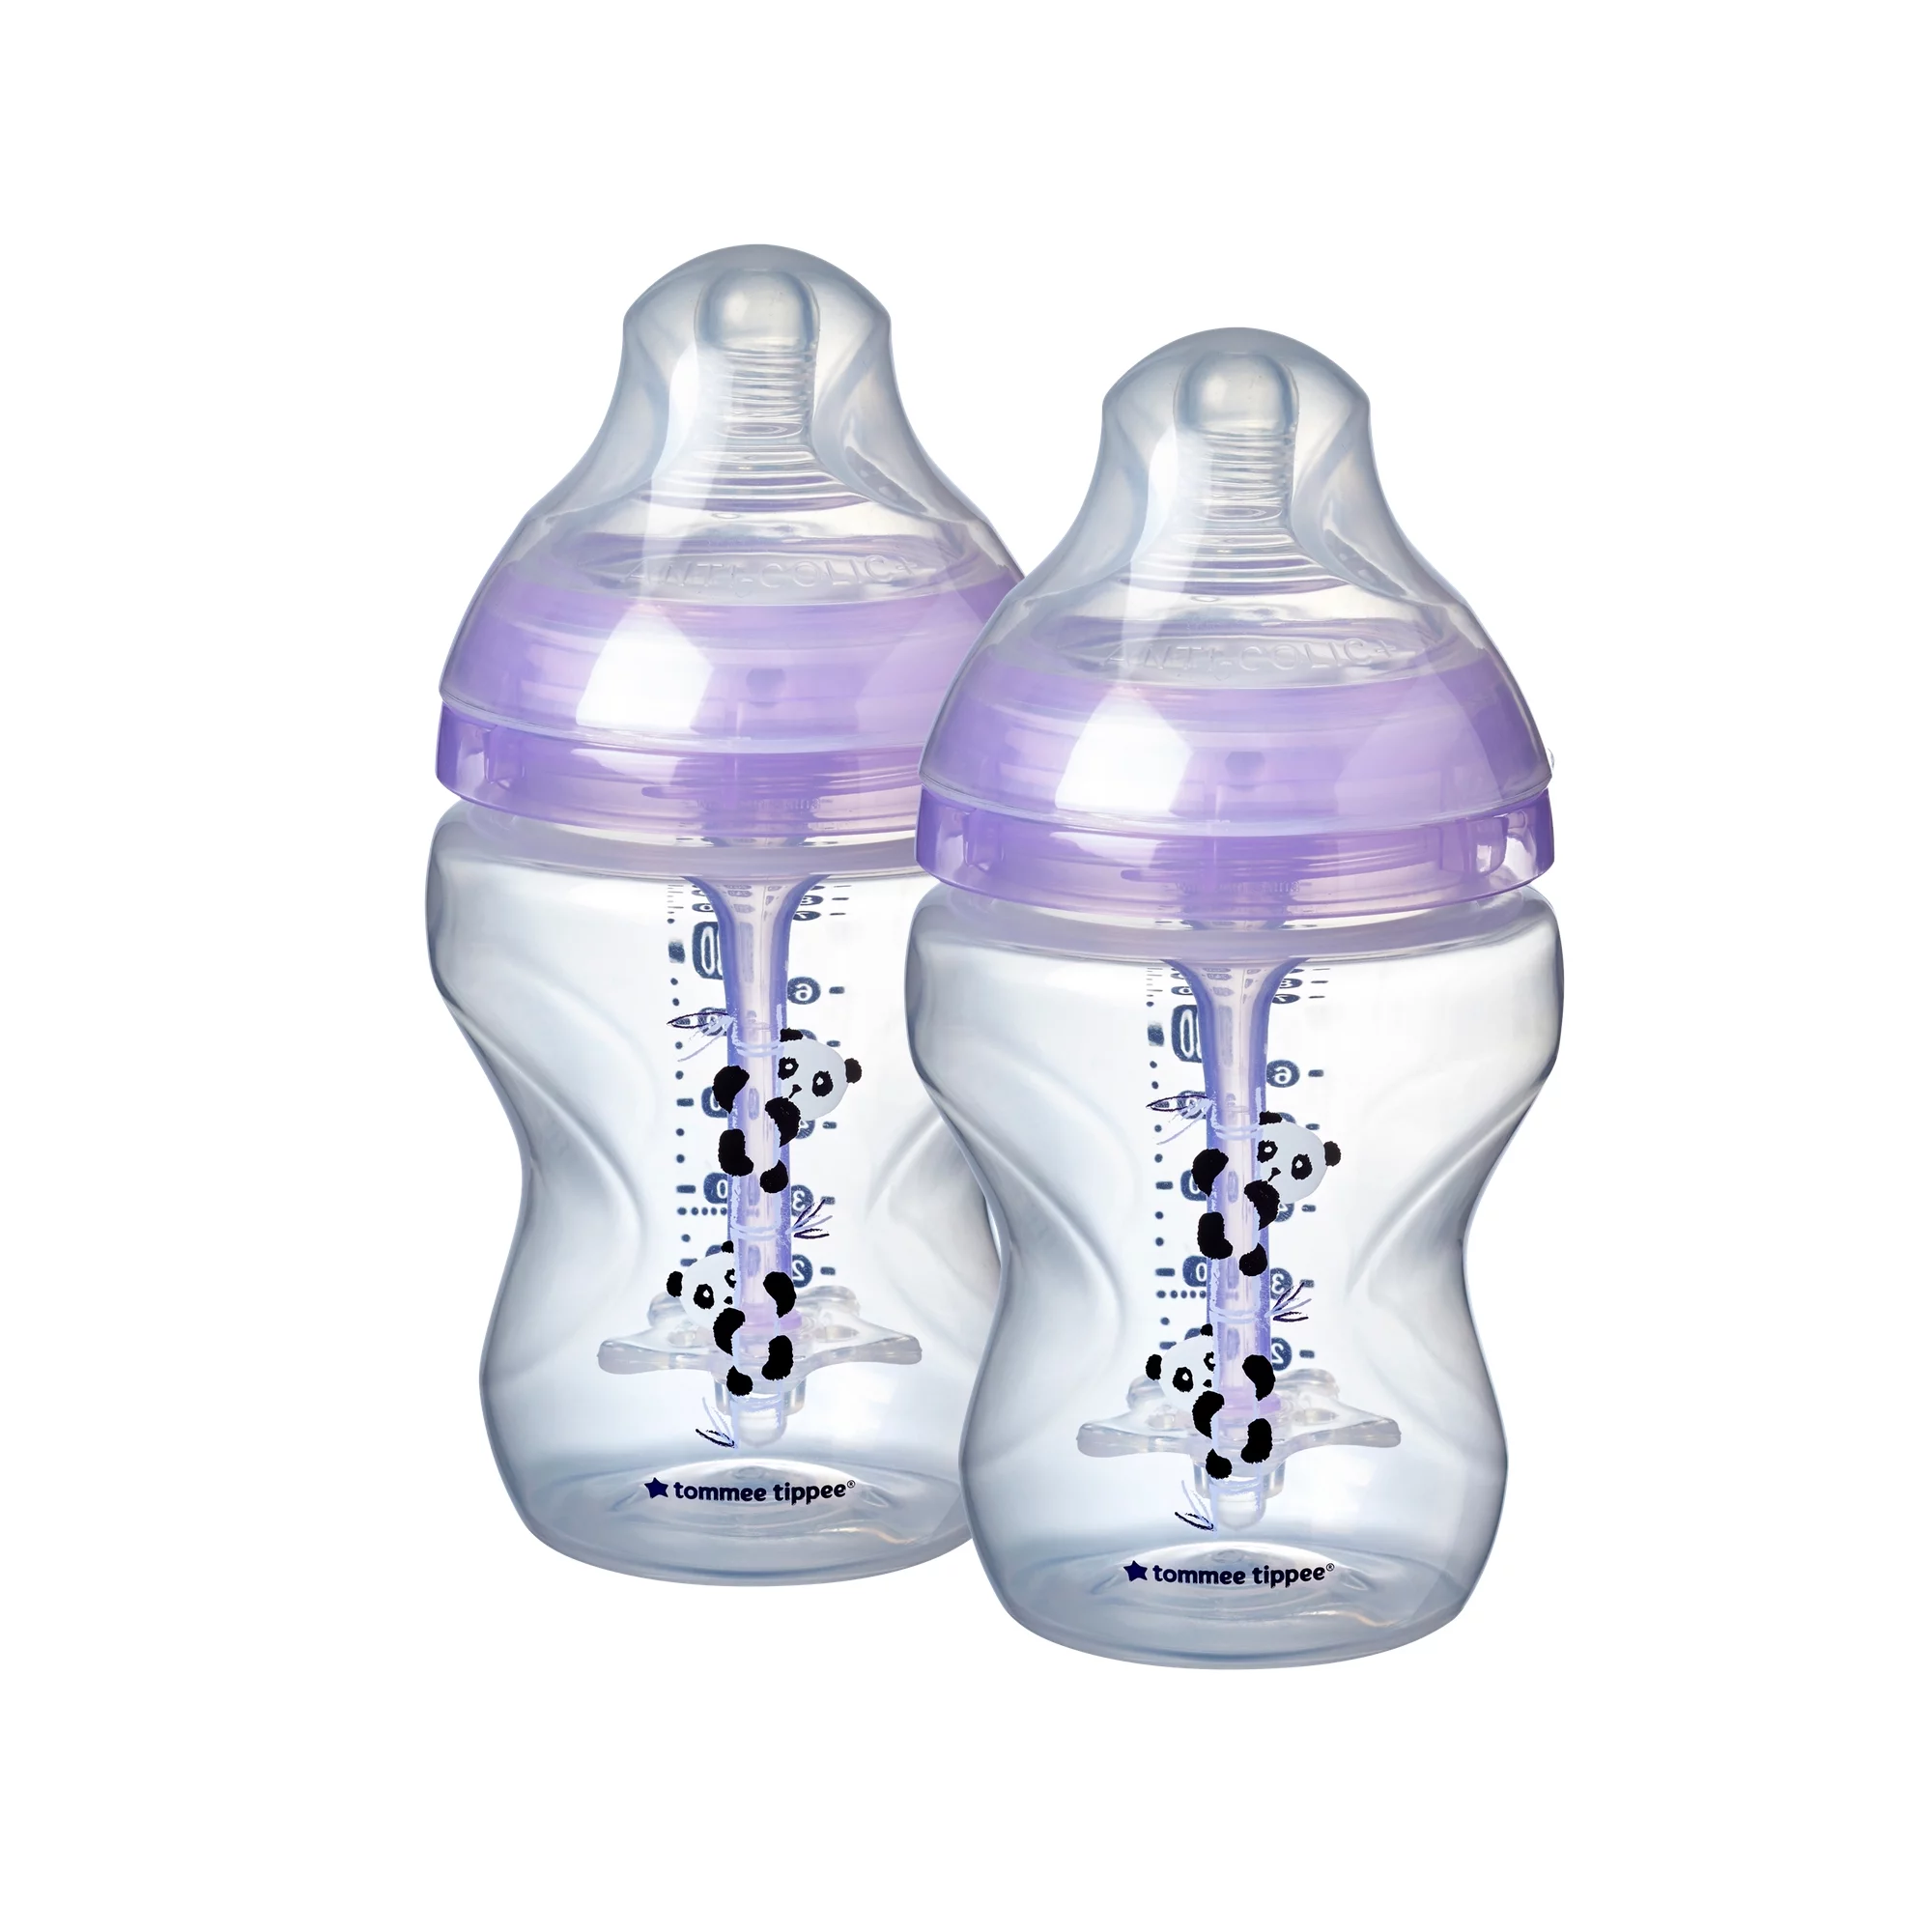 Tommee Tippee Anti-Colic Baby Bottles | Slow Flow Breast-Like Nipple and Unique Anti-Colic Venting System | Purple Pandas (9oz, 2 Count)